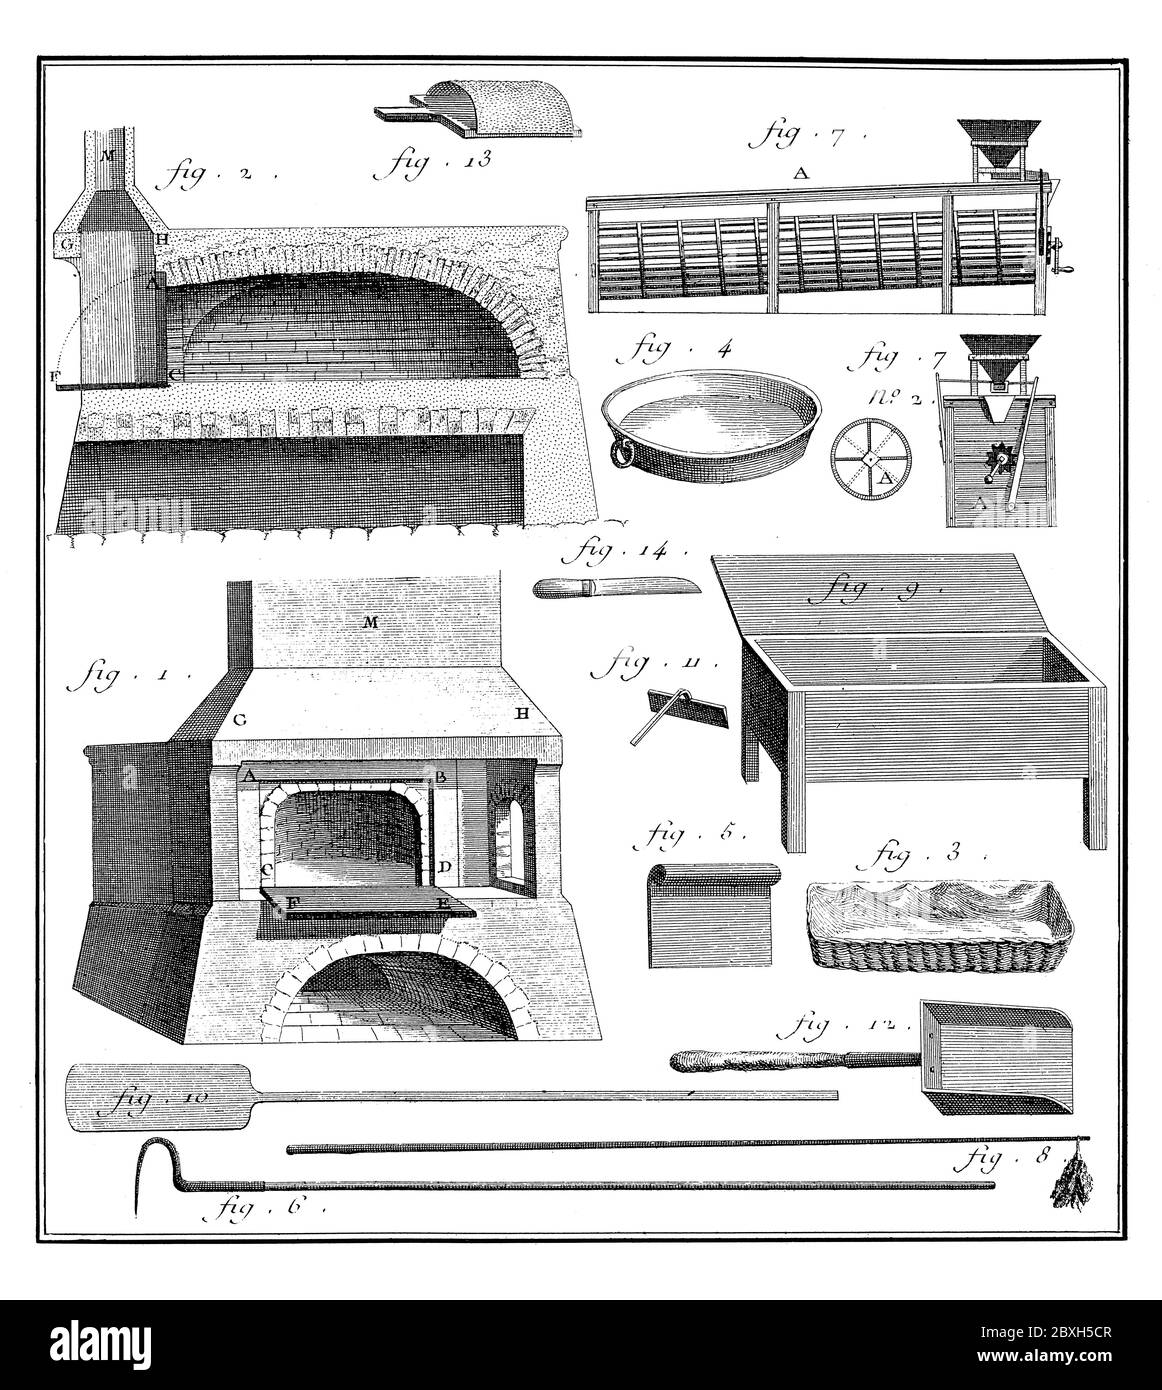 18th century illustration of bakery equipment and tools. Published in 'A Diderot Pictorial Encyclopedia of Trades and Industry. Manufacturing and Stock Photo